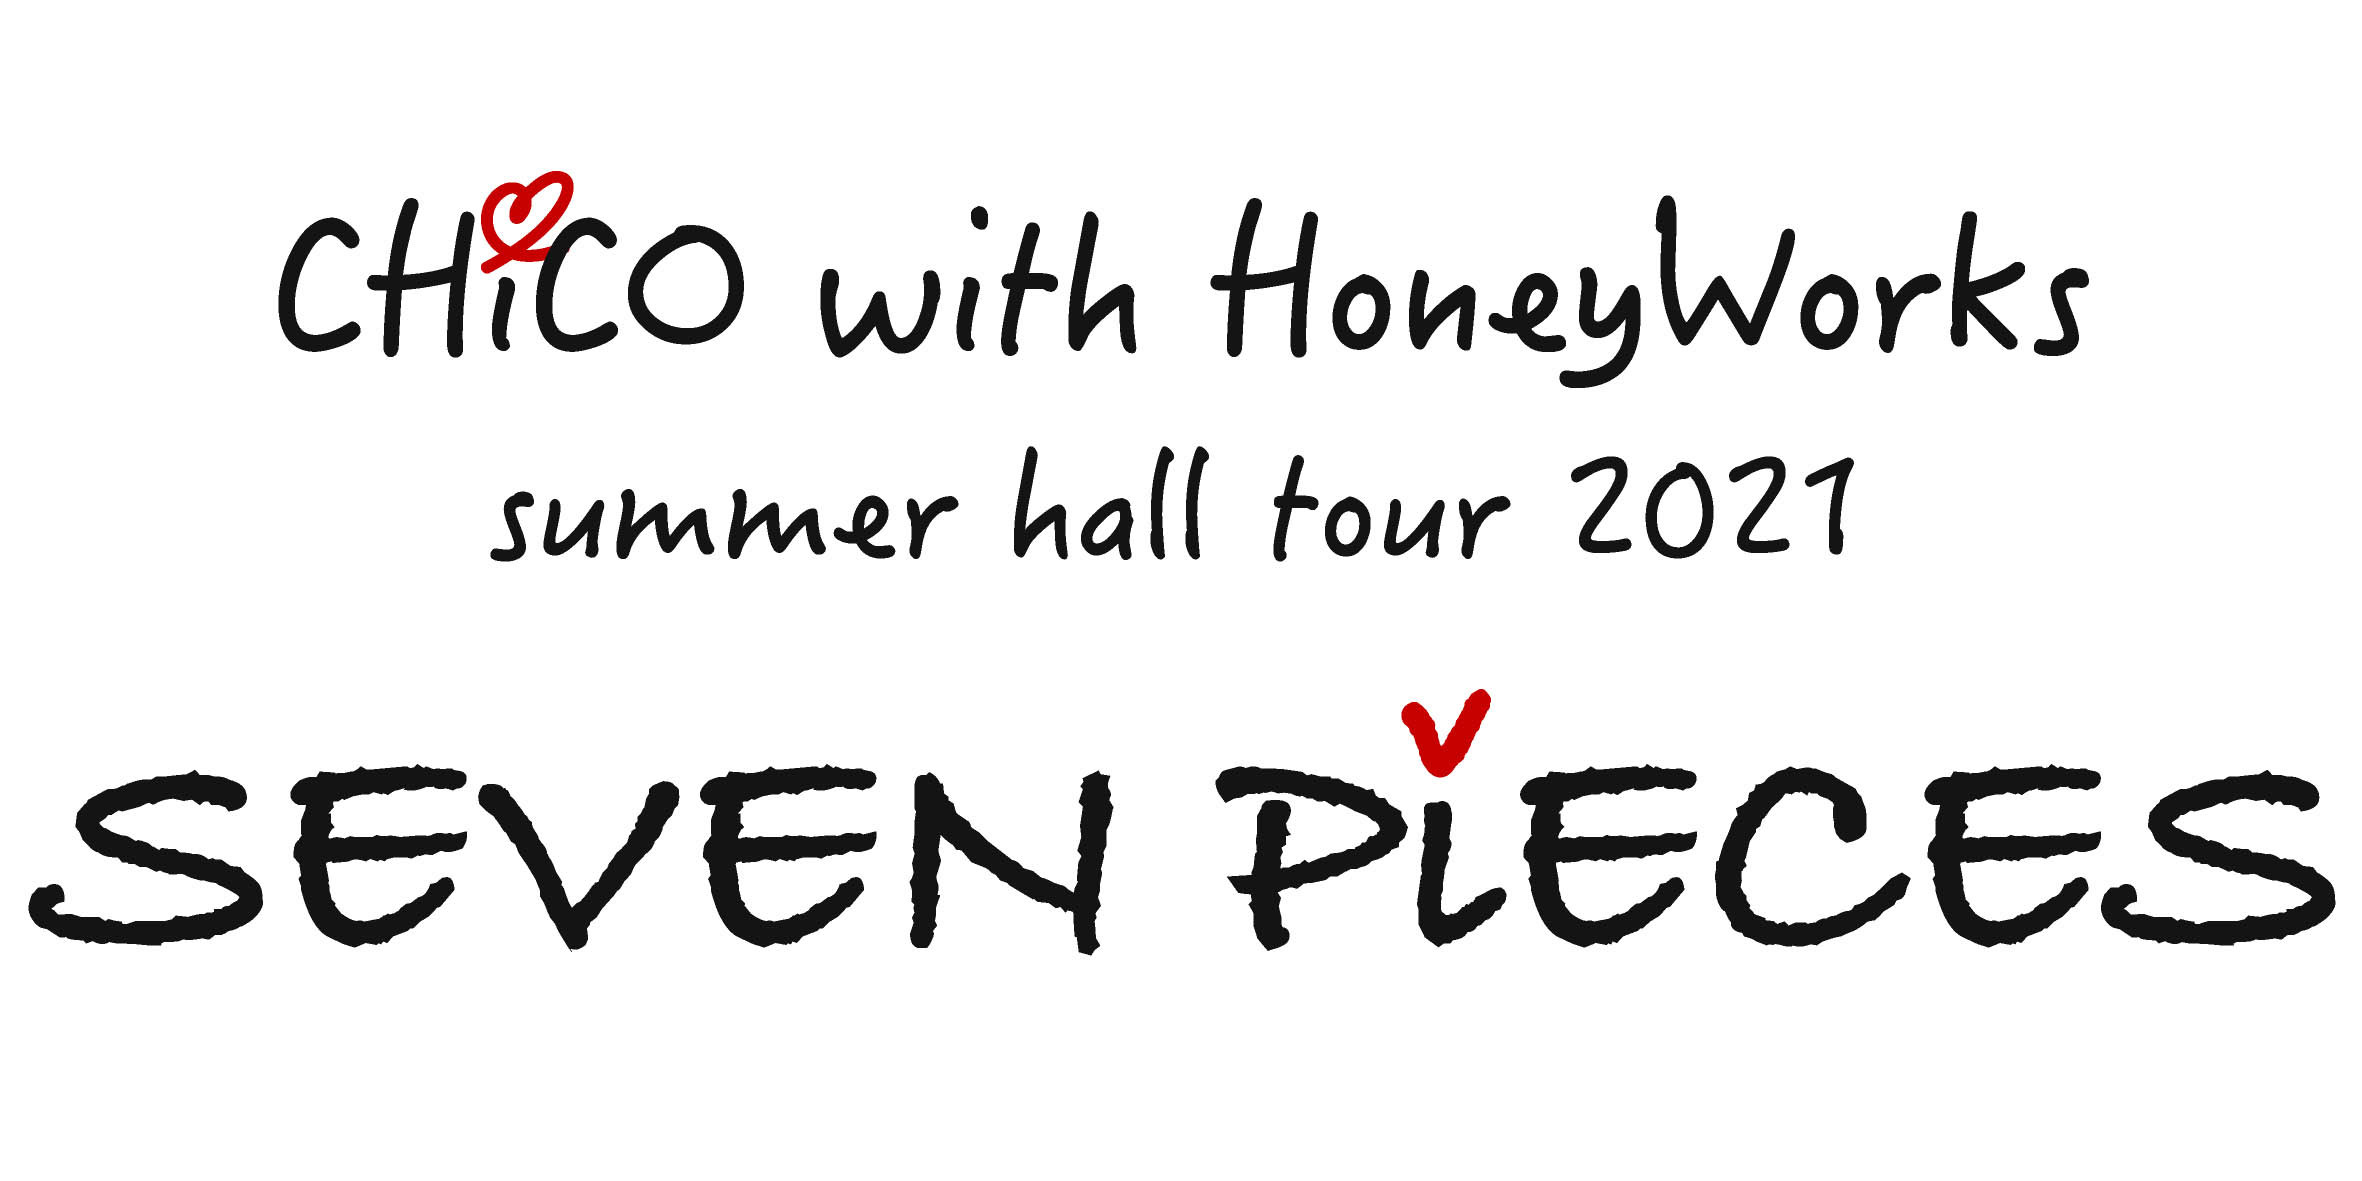 『CHiCO with HoneyWorks summer hall tour 2021 SEVEN PiECES』ロゴ